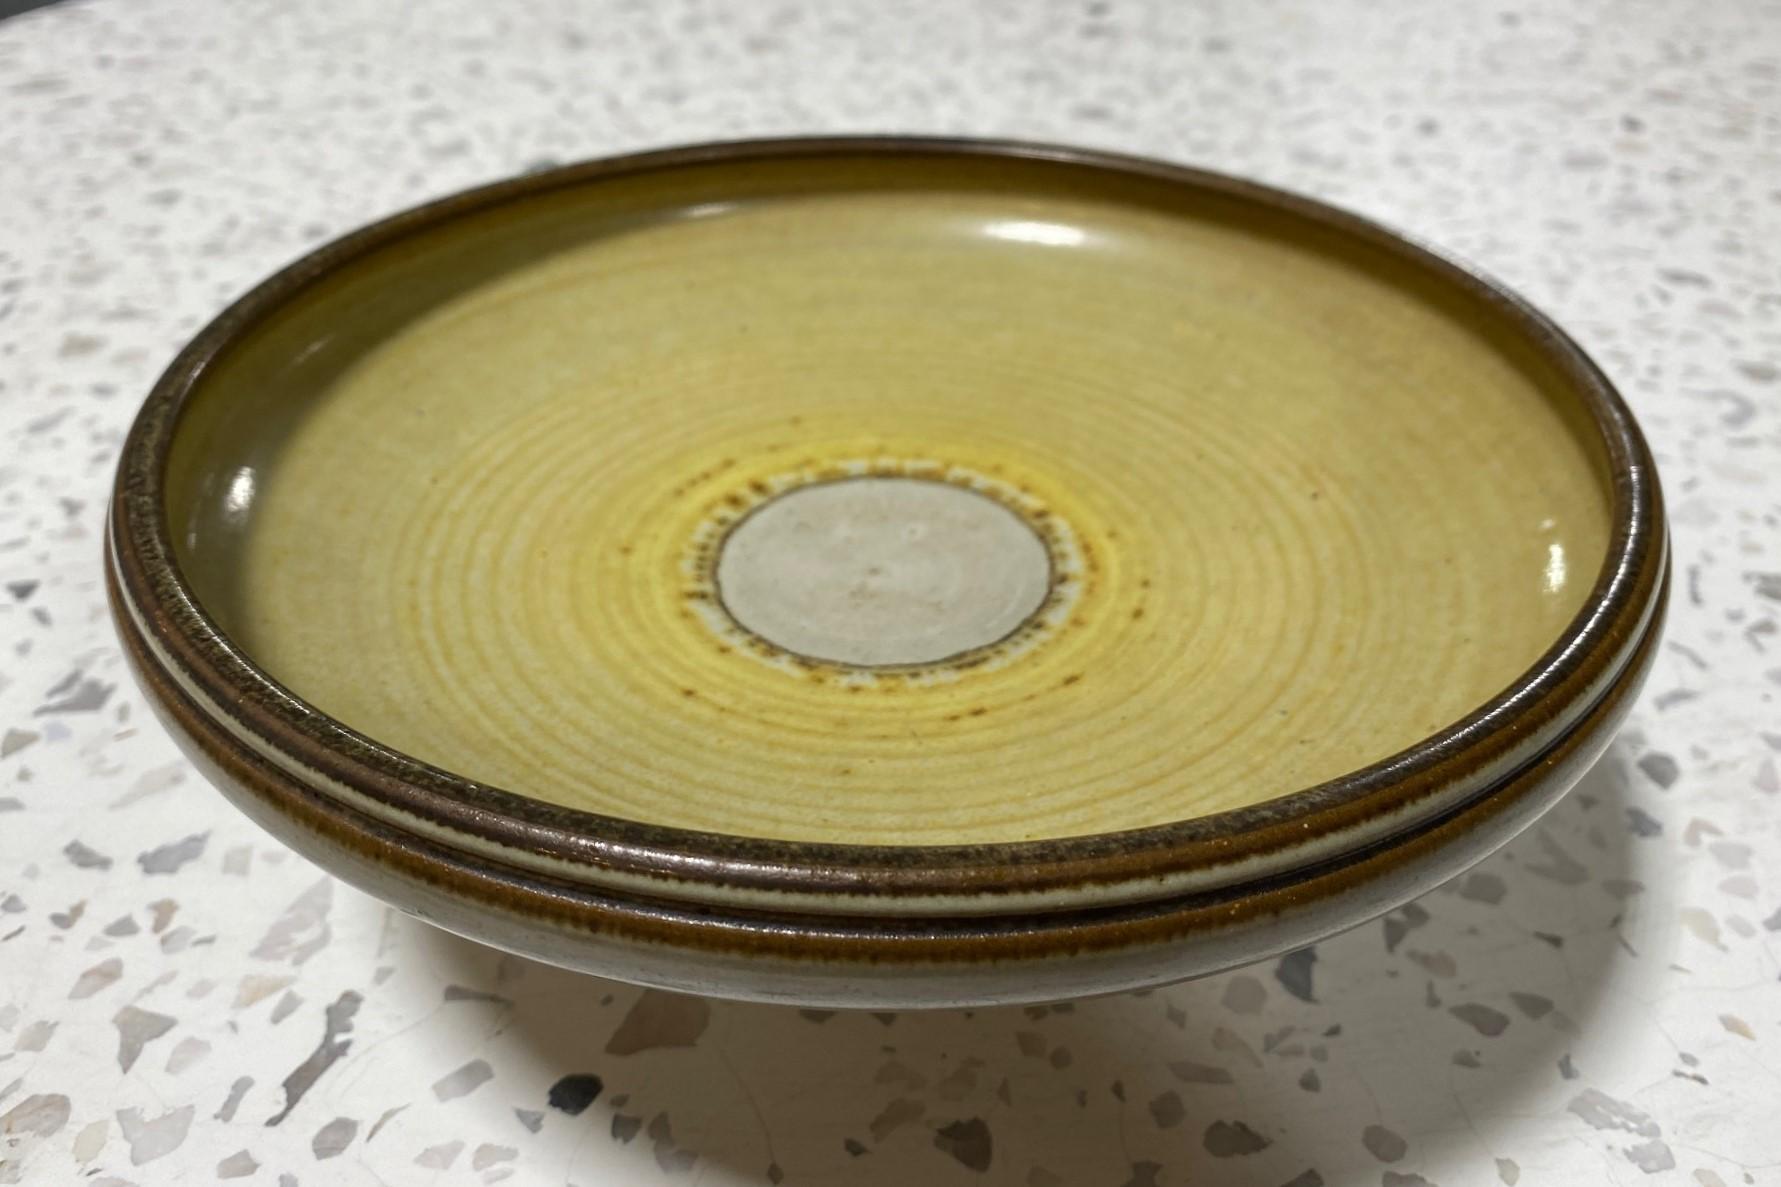 A gorgeously crafted, beautifully yellow glazed, Mid-Century Modern pedestal bowl by California master ceramist Rupert Deese who worked closely with pottery legend Harrison Mcintosh.

Signed with Deese's cipher/ stamp on the base as well as the